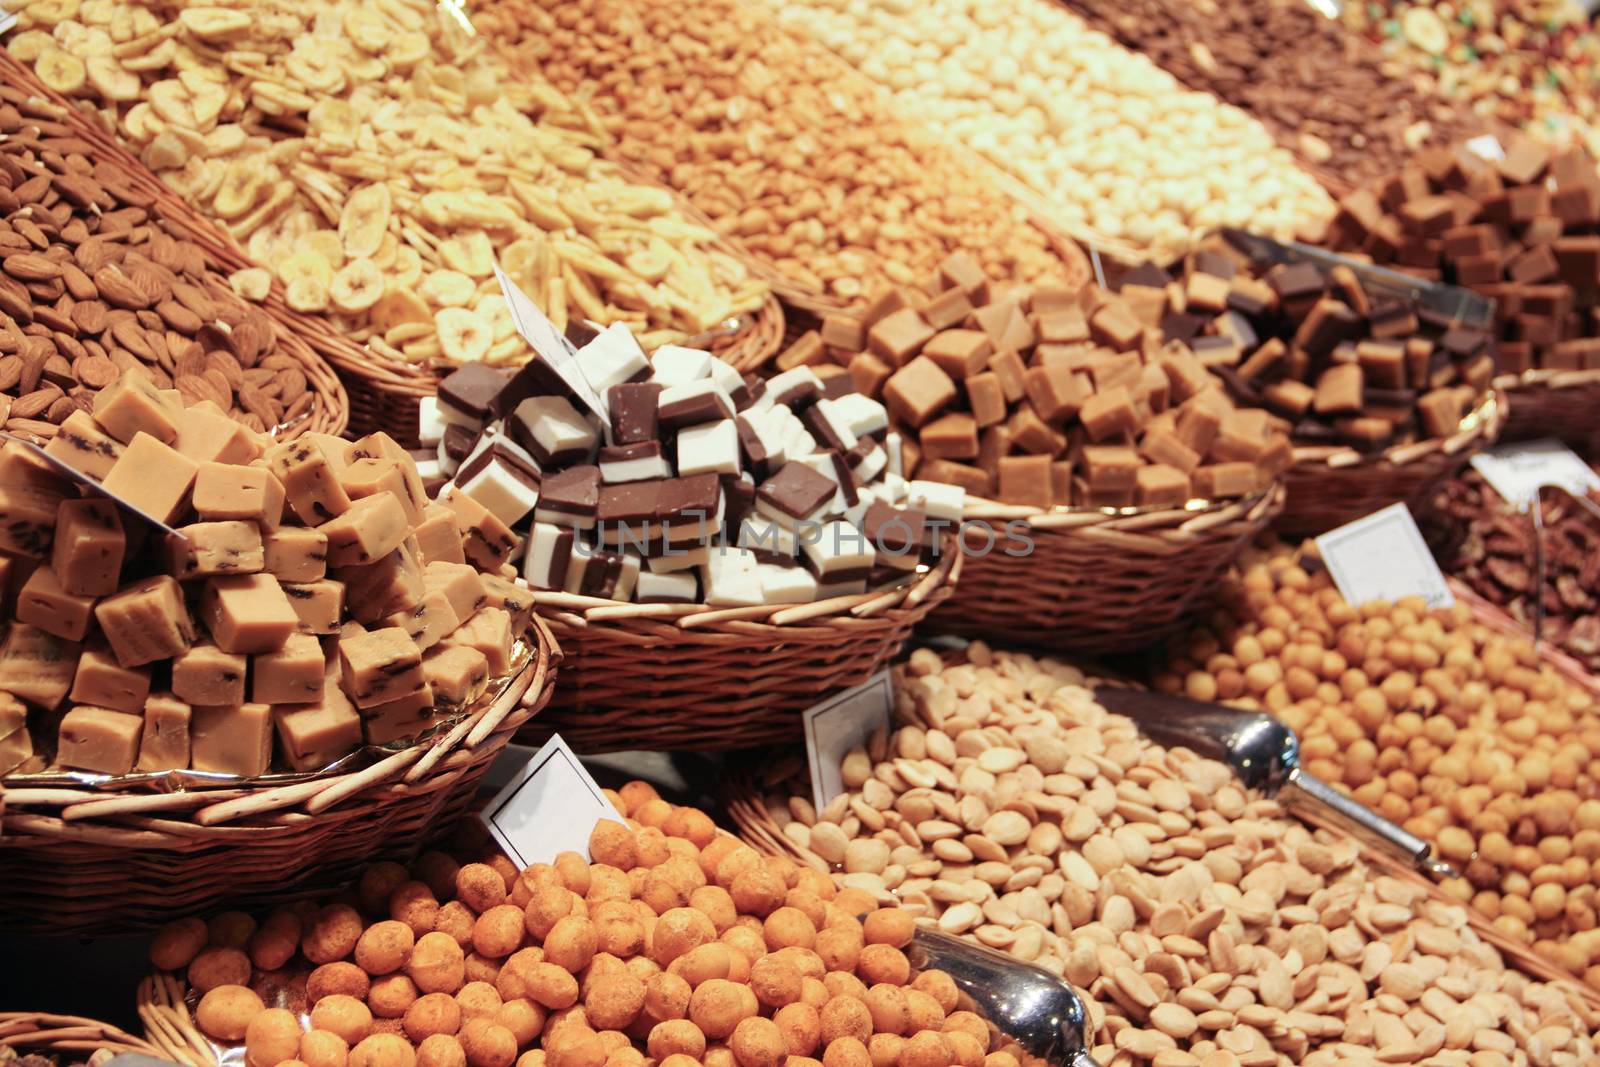 Dry fruits nuts sweets and snacks on the market stall close up